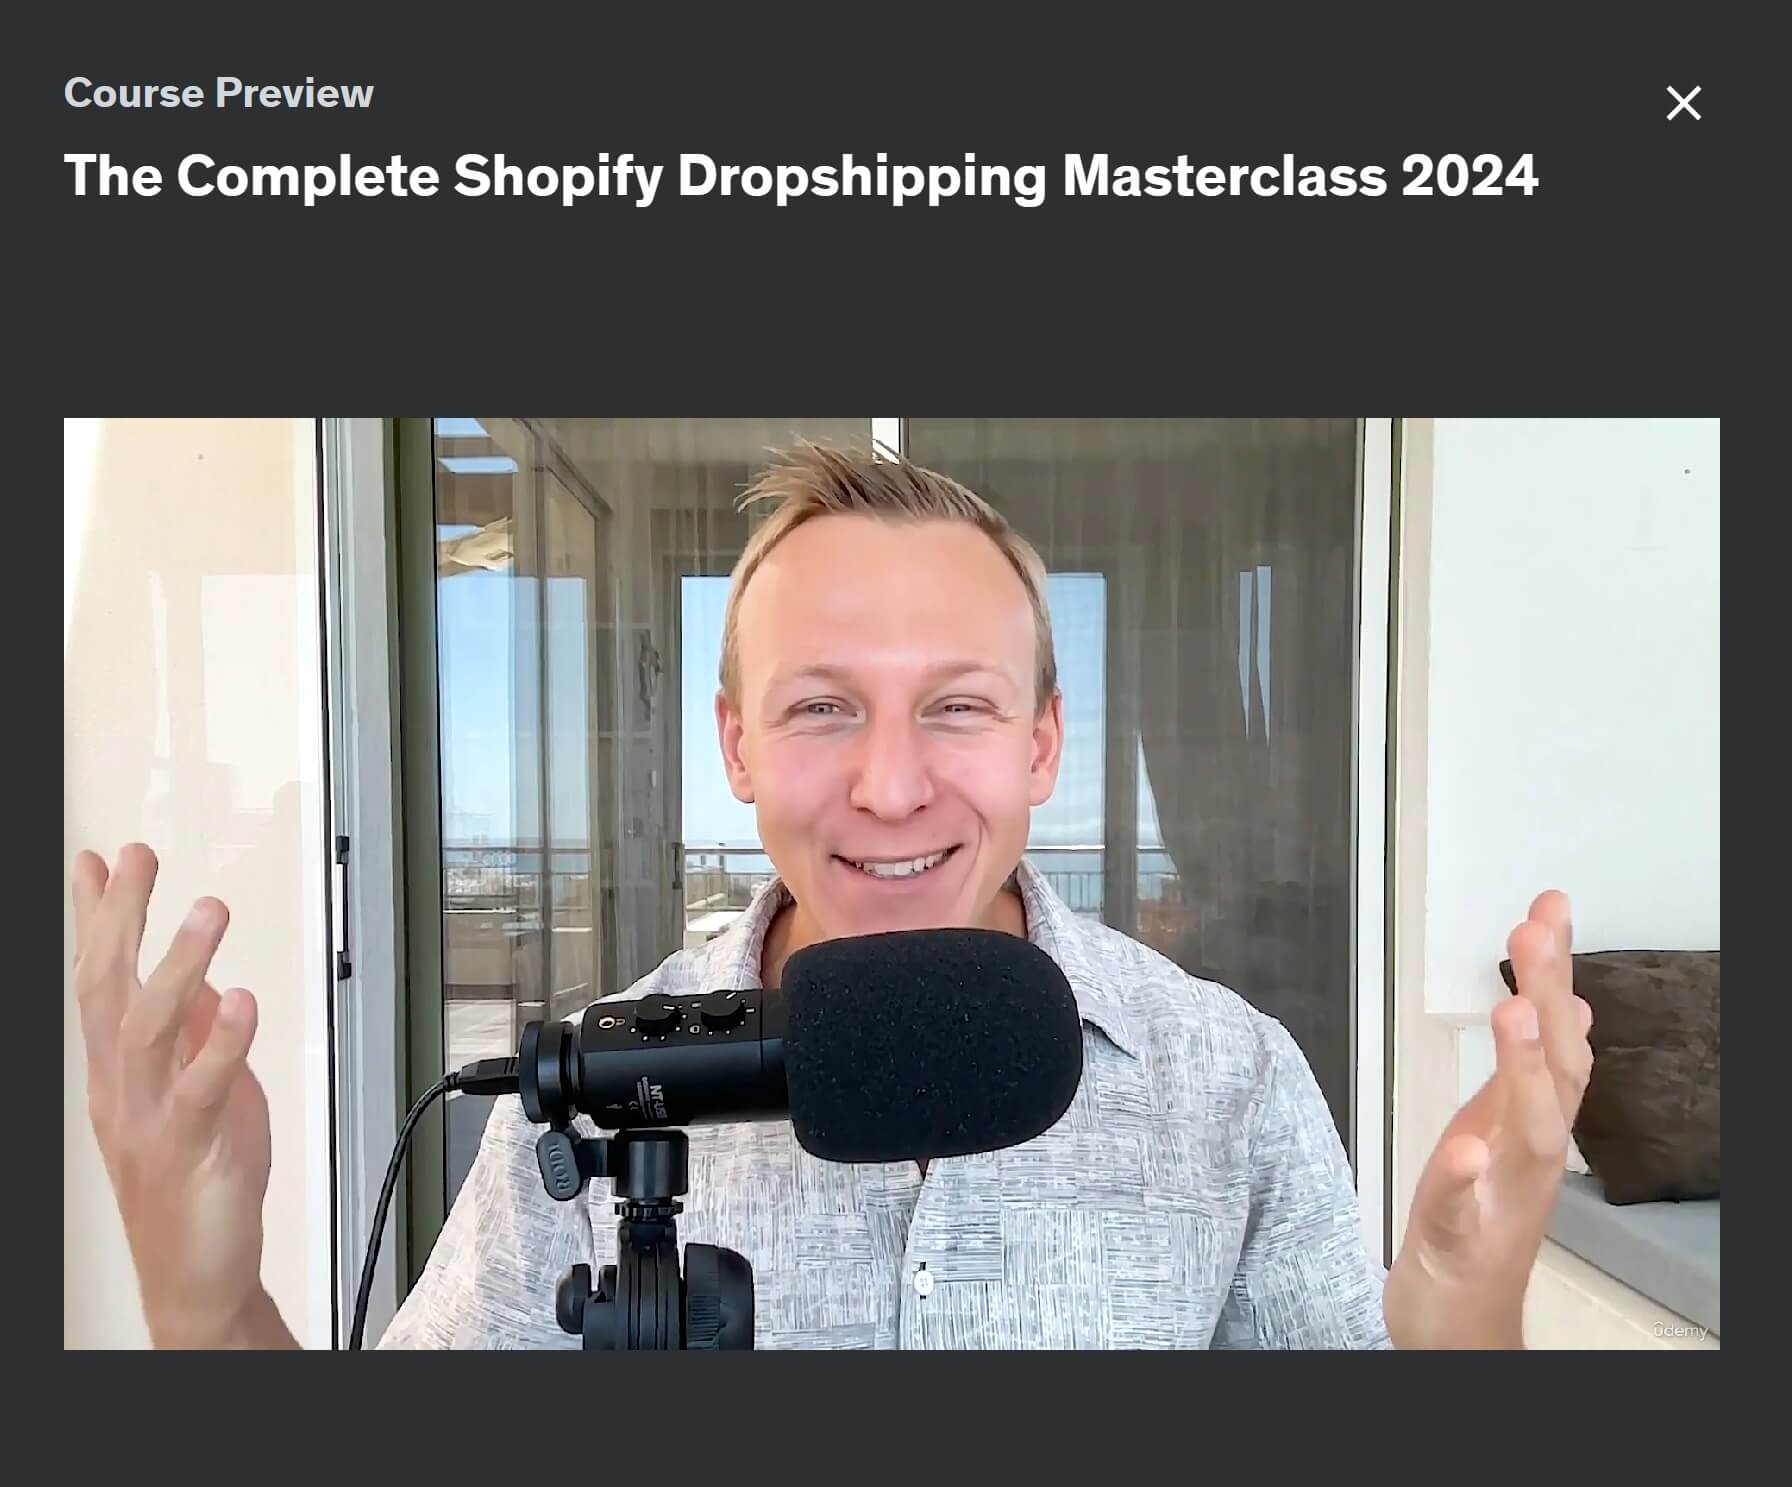 The Complete Shopify Dropshipping Masterclass 2024 Preview